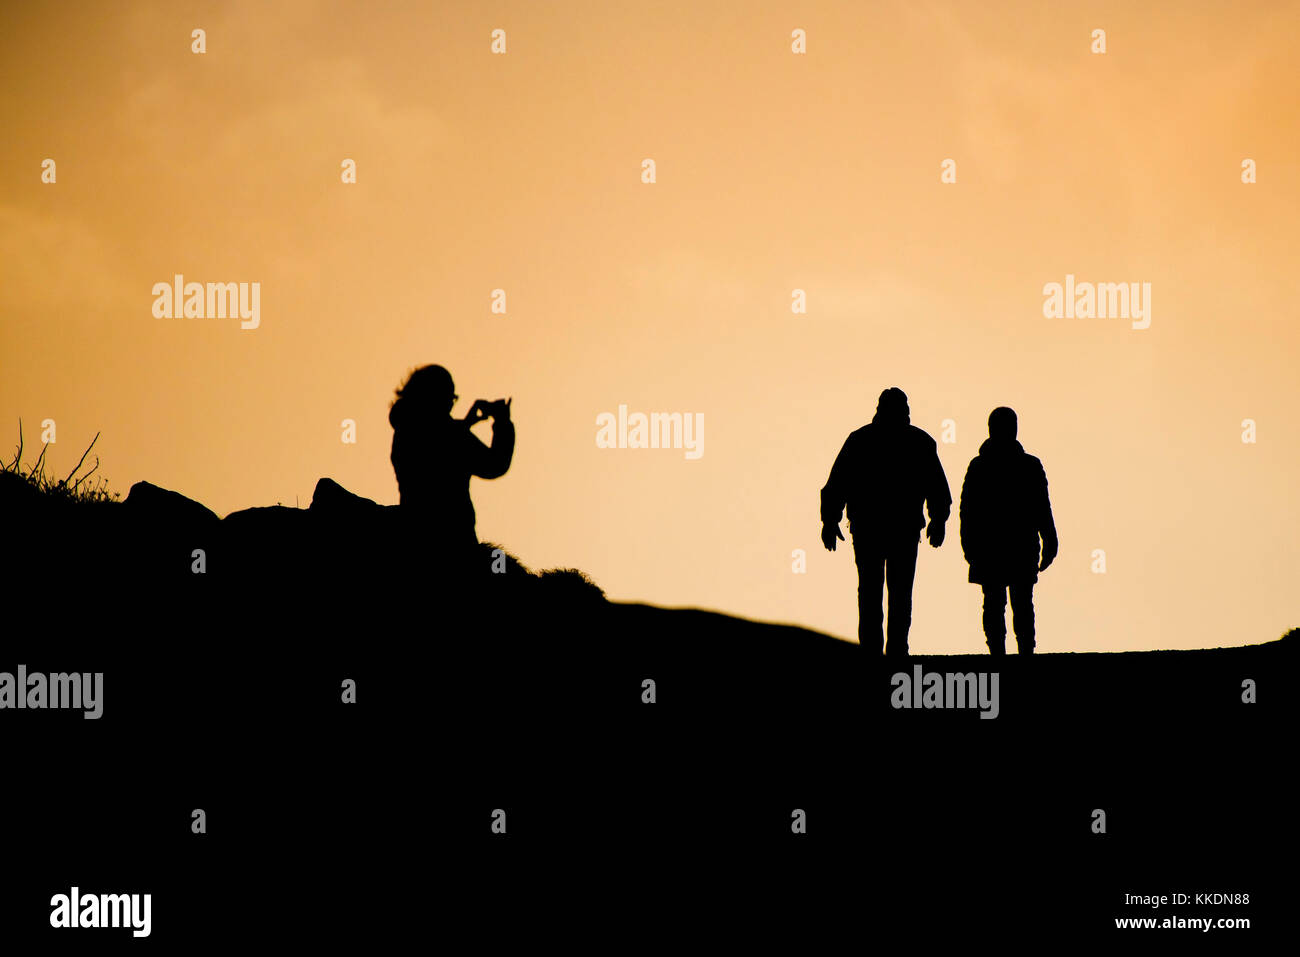 Silhouettes - a woman using her smartphone to photograph a couple walking in the late evening light. Stock Photo